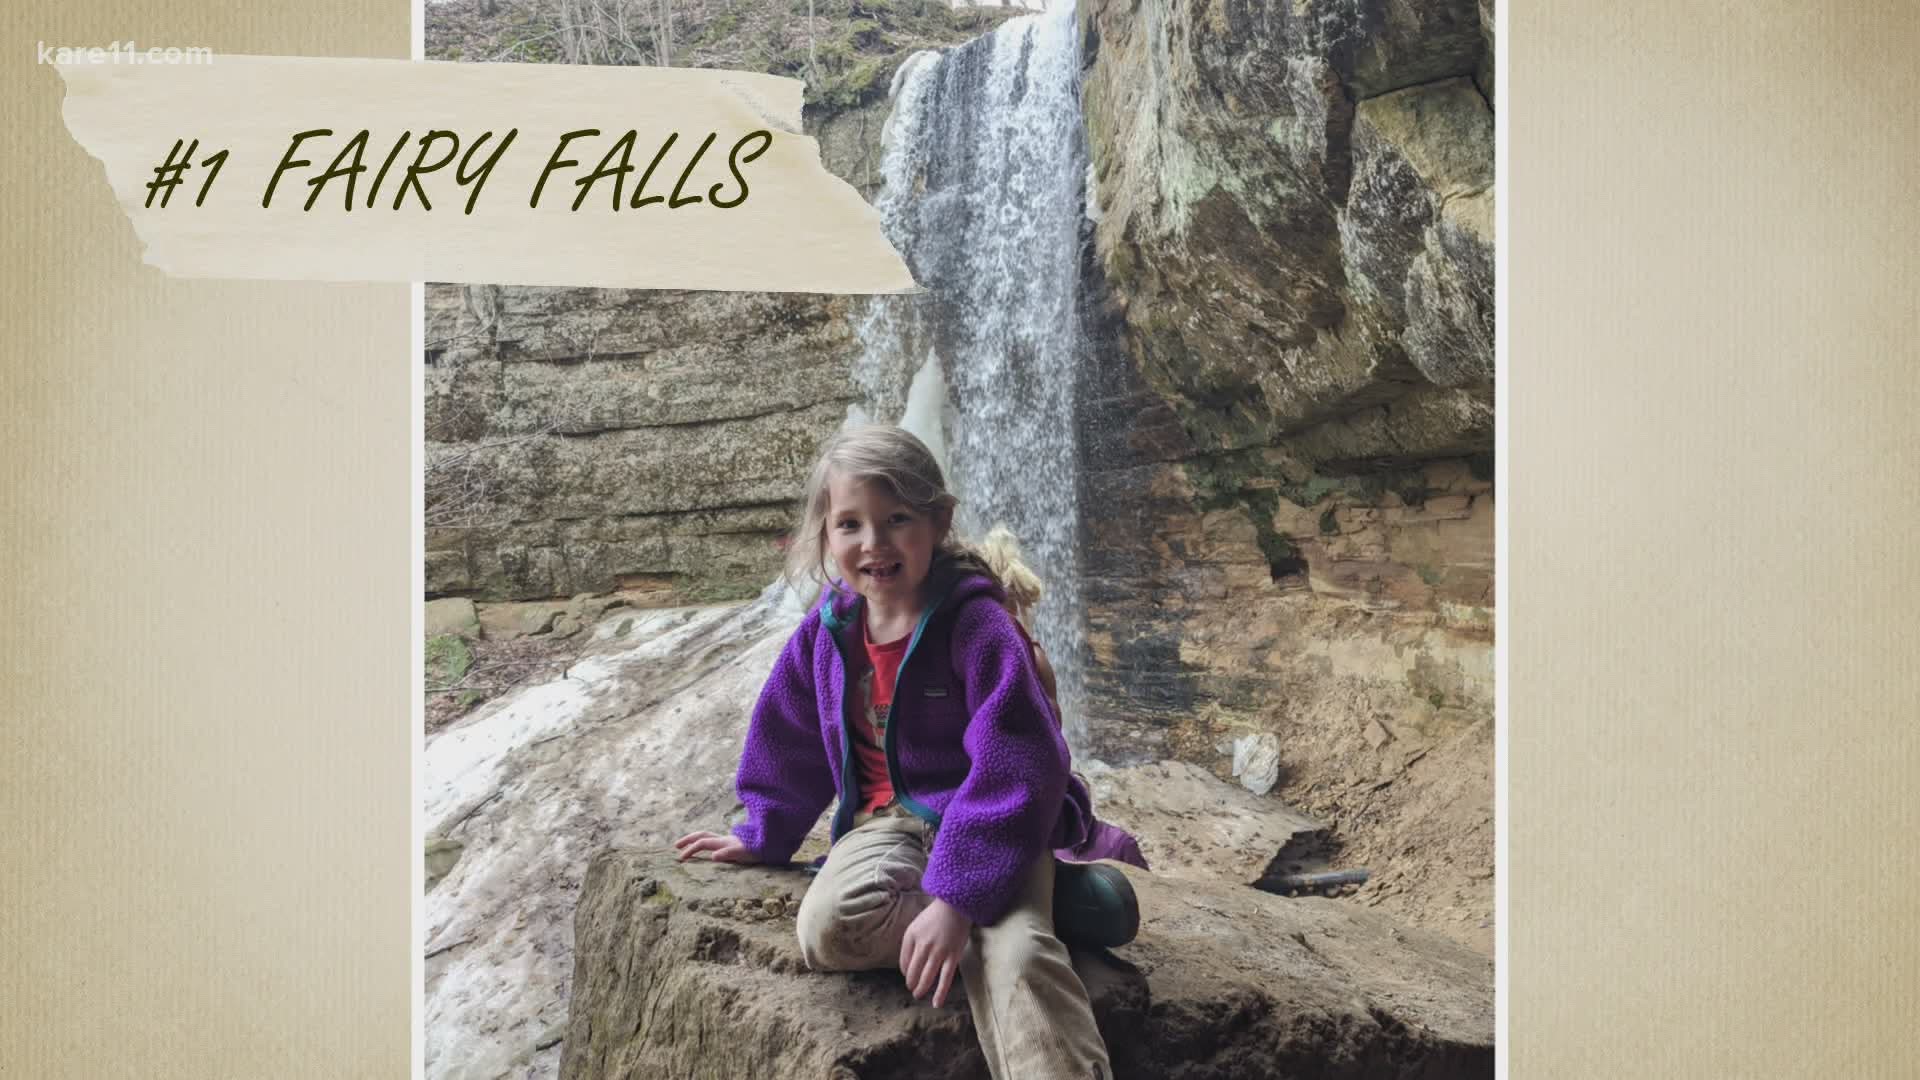 Wynn Radke just completed her goal of visiting 67 waterfalls, a five-month quest inspired by COVID-19 restrictions.